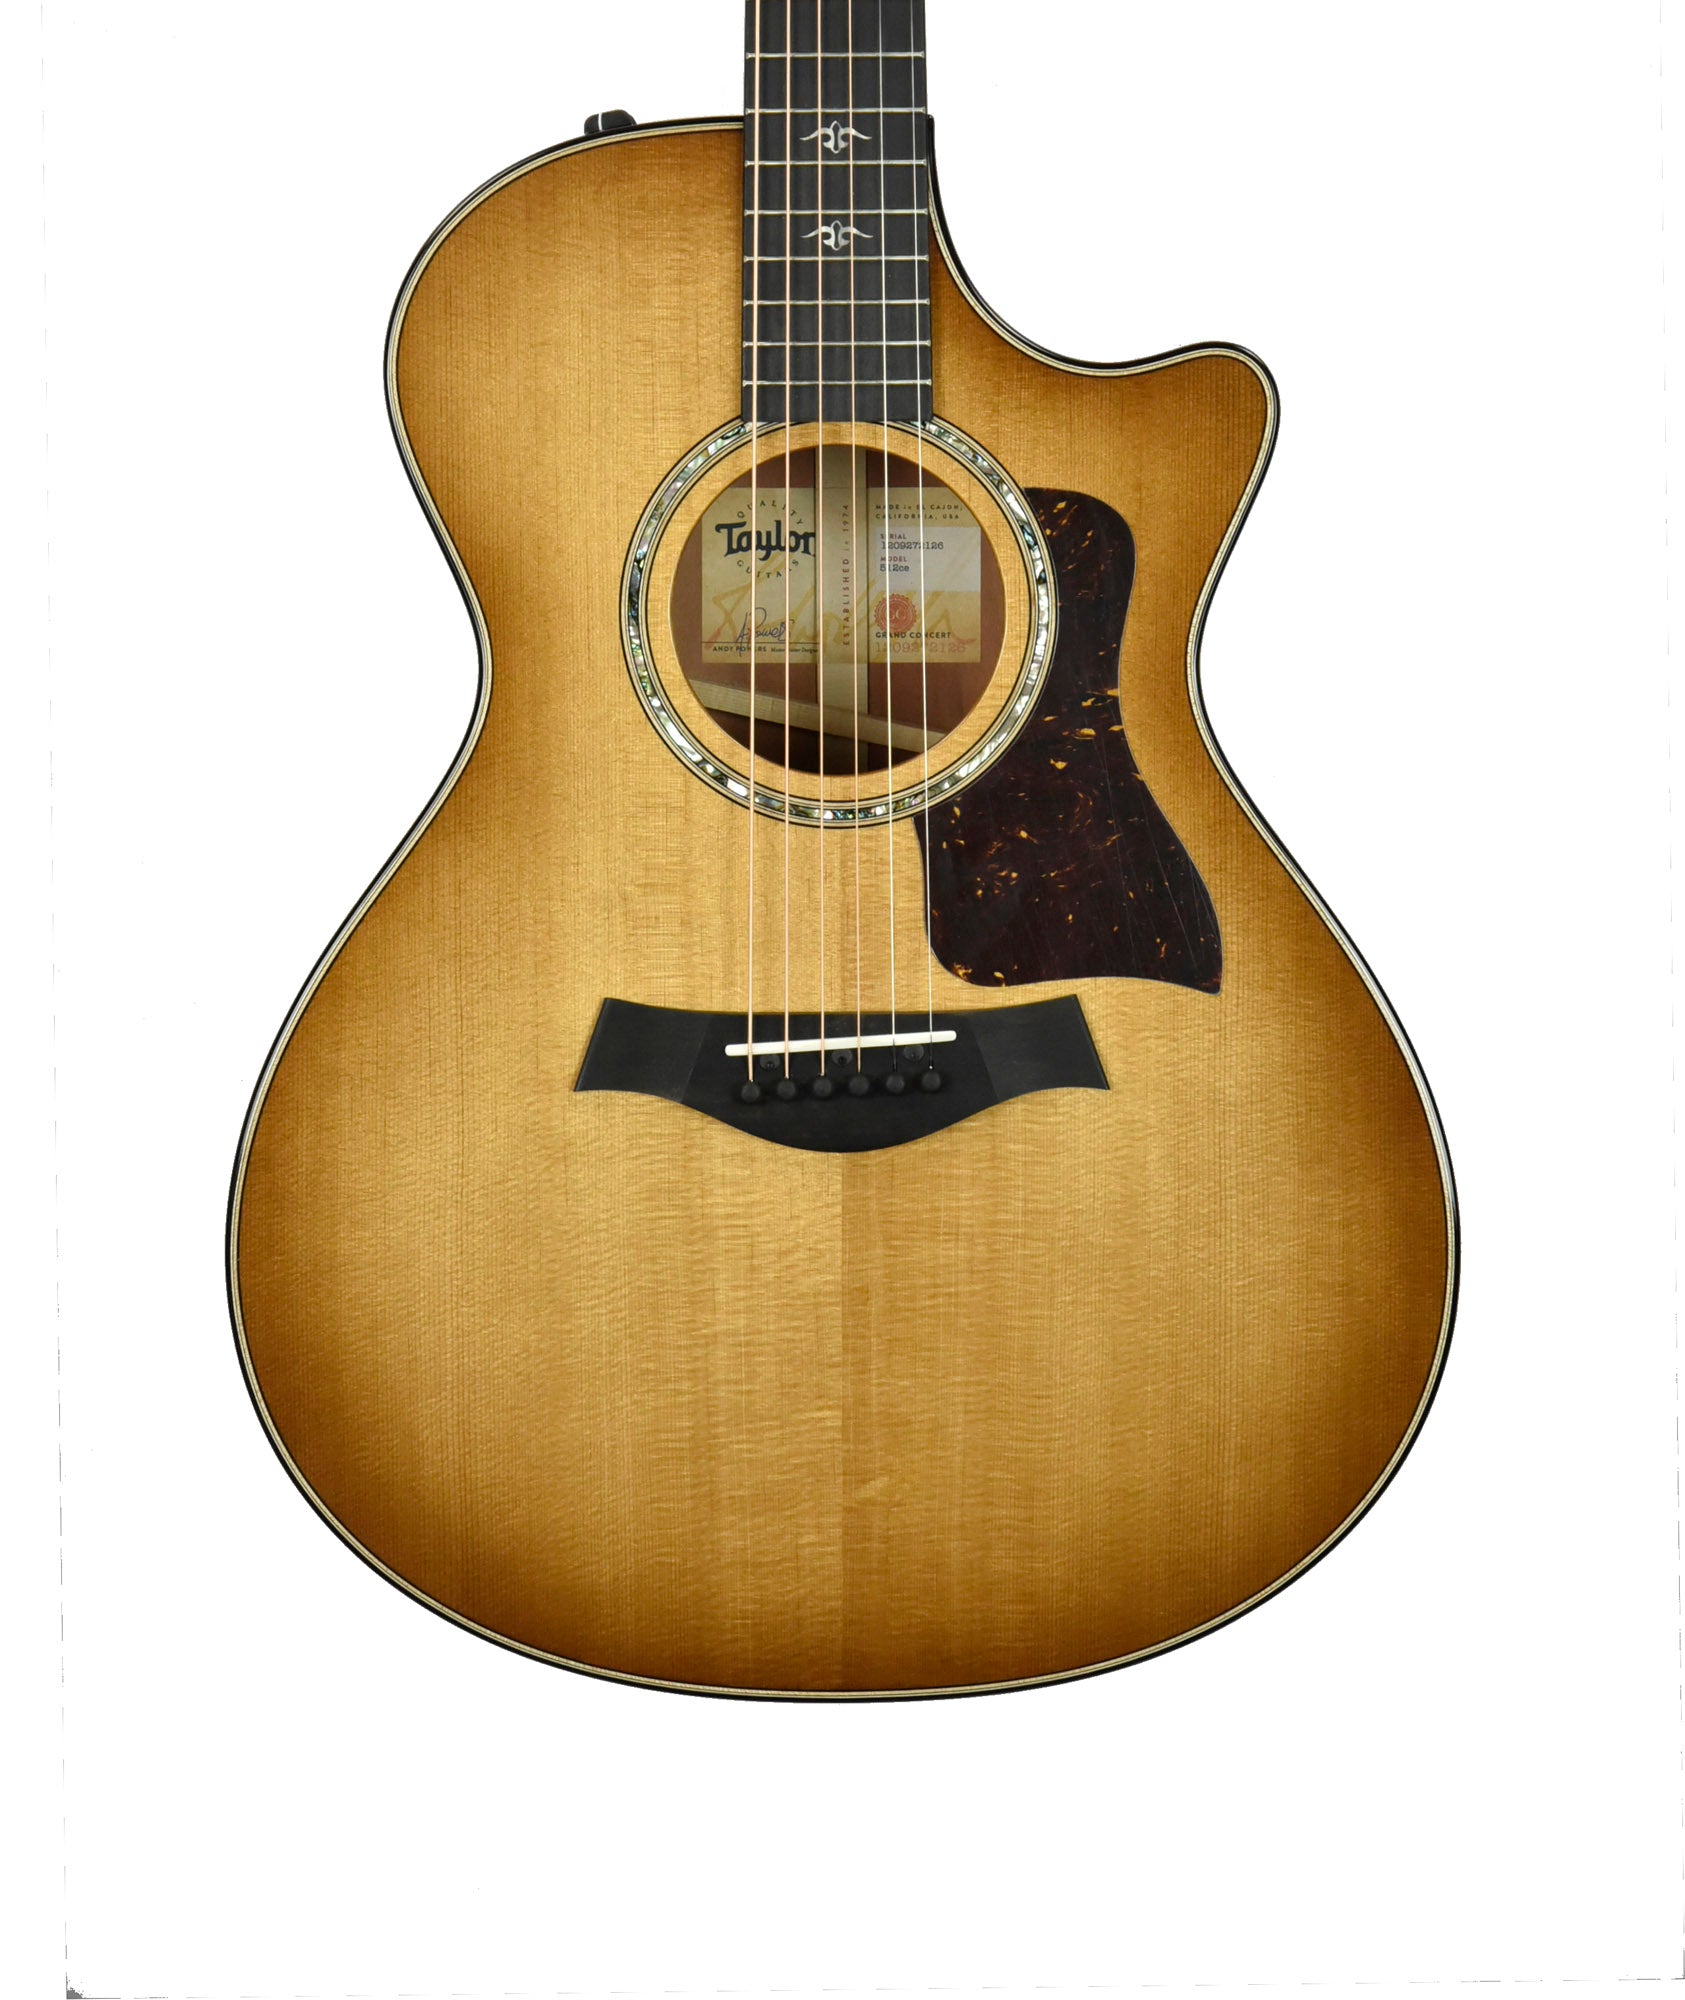 Taylor 512ce Urban Ironbark Acoustic-Electric Guitar in Shaded